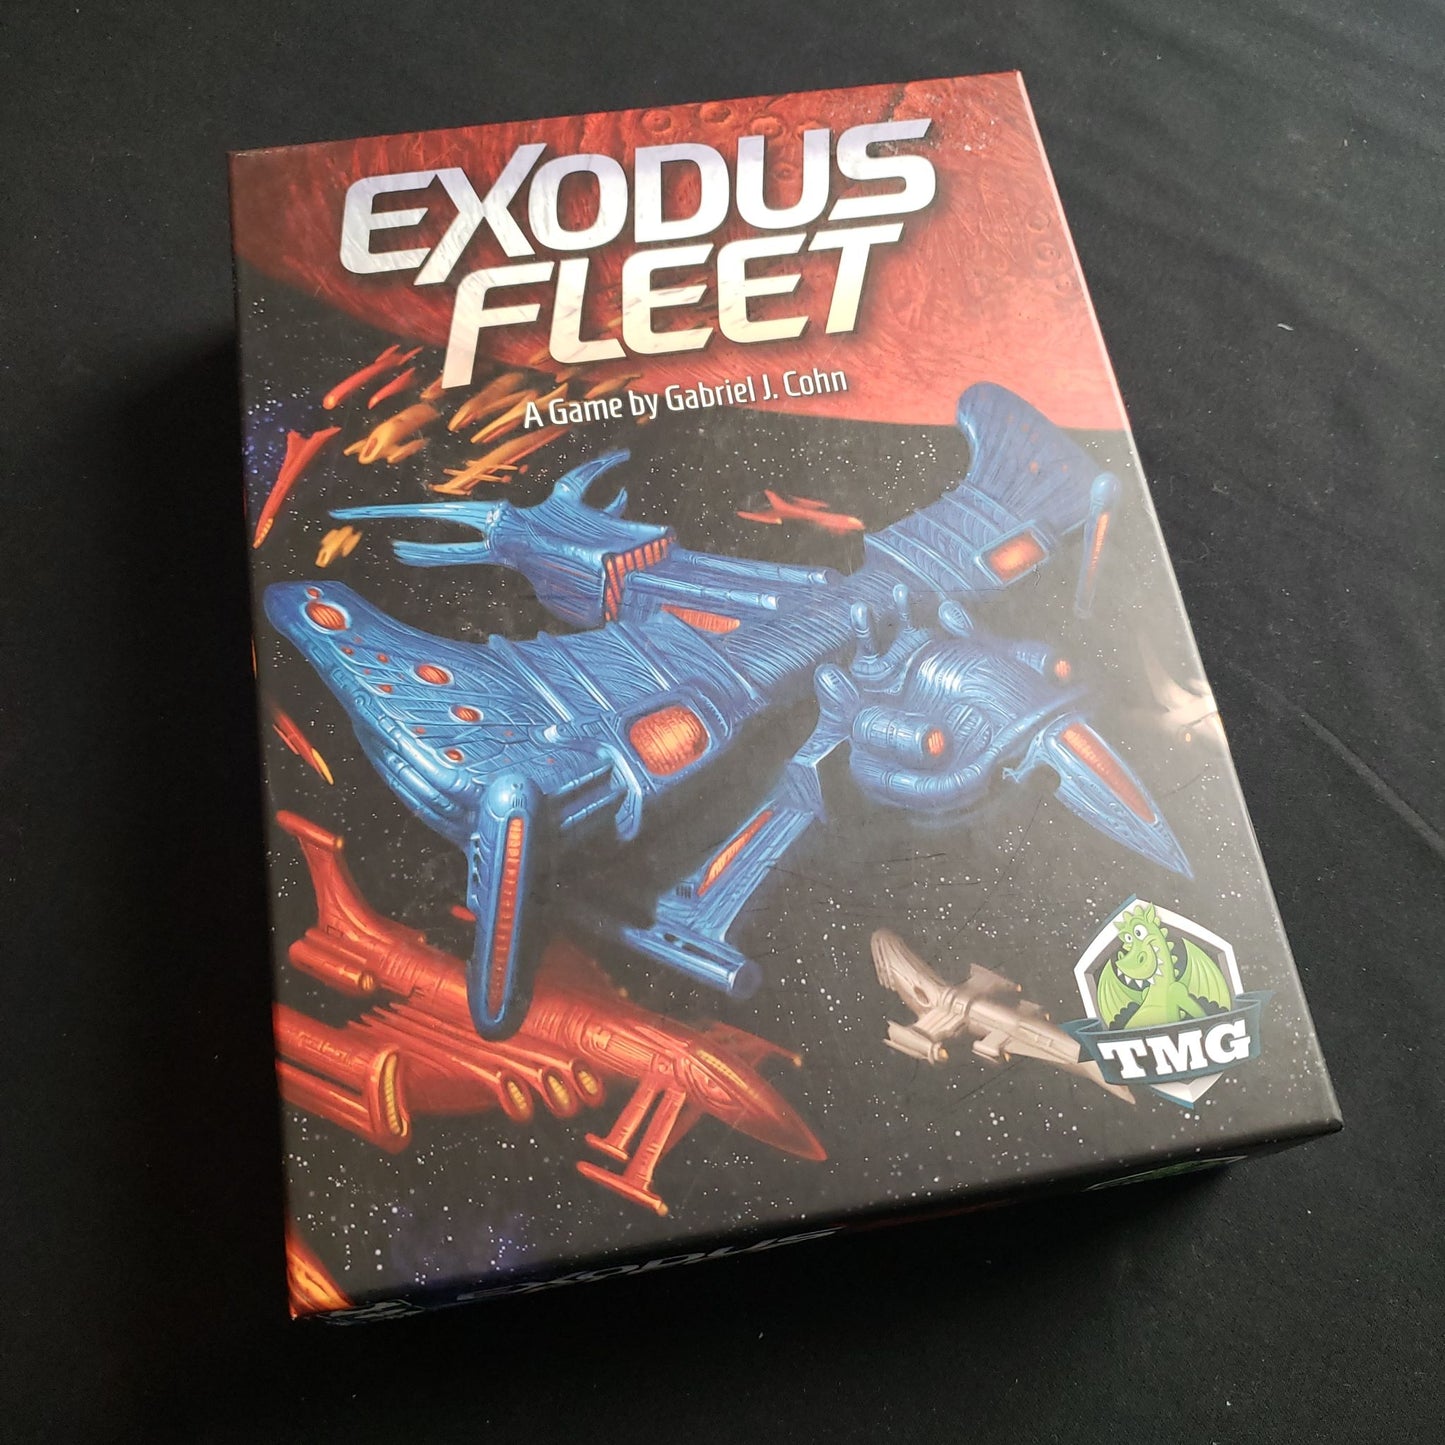 Image shows the front cover of the box of the Exodus Fleet board game